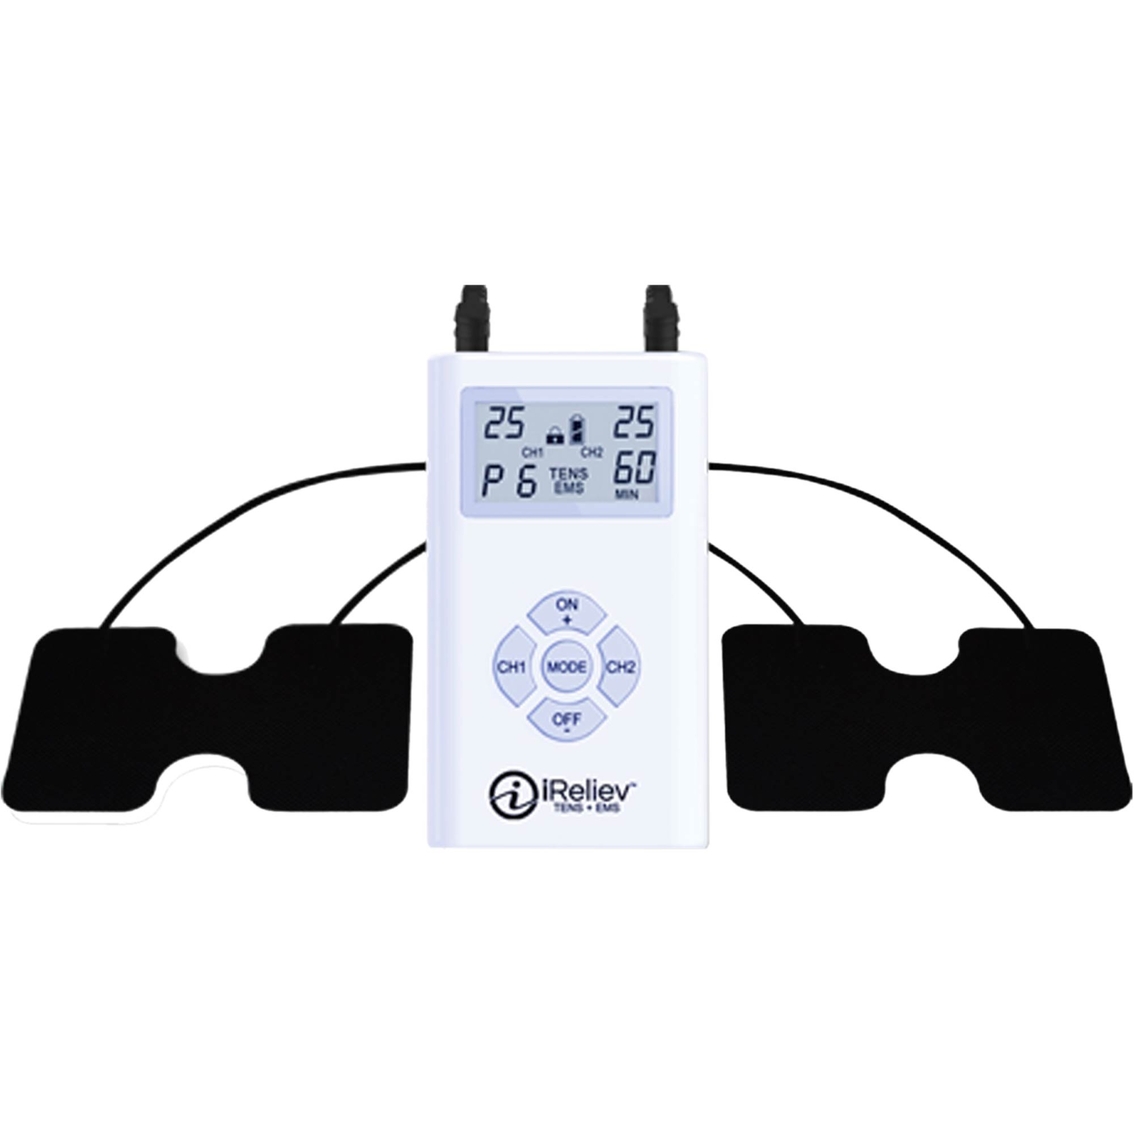 TENS Units & EMS Devices, TENS + EMS for Pain Relief, iReliev